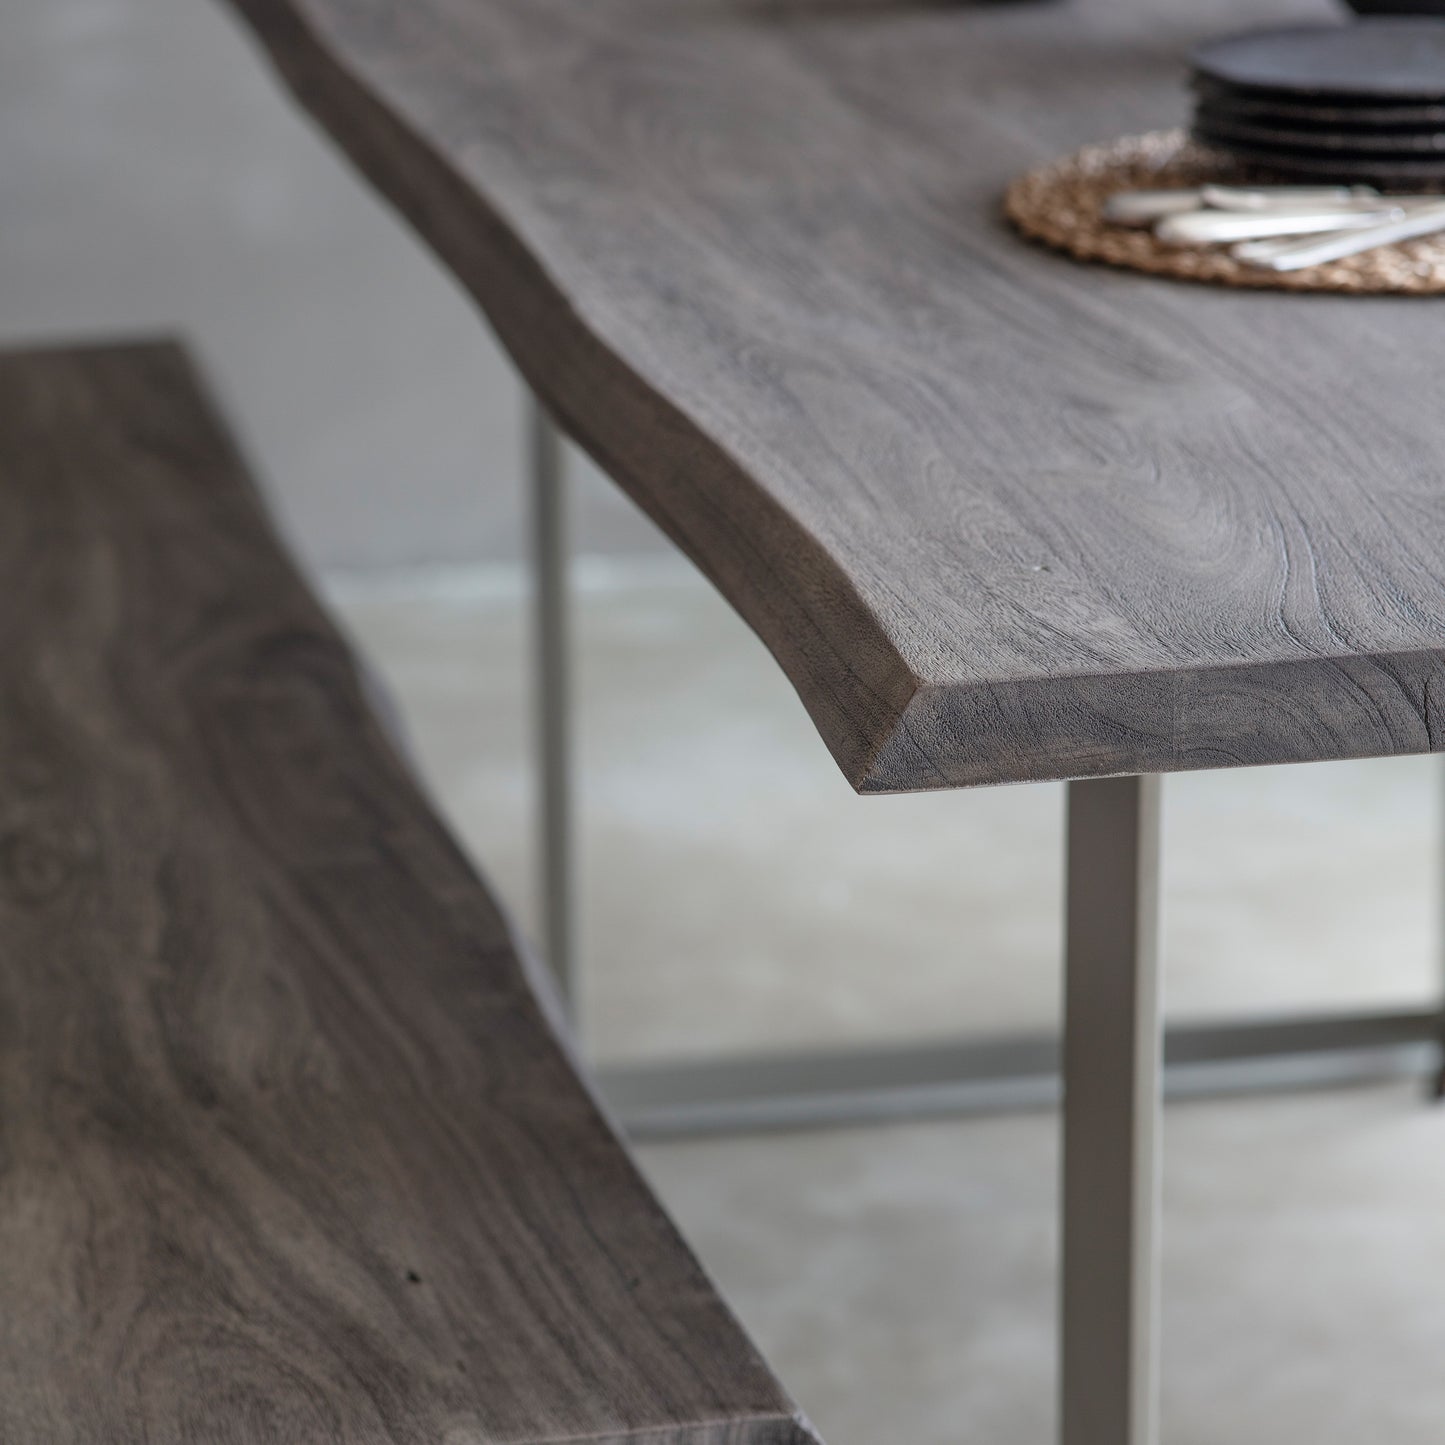 A Southpool Dining Table Grey 2000x1000x770mm with a metal base and a bench, perfect for home furniture and interior decor.